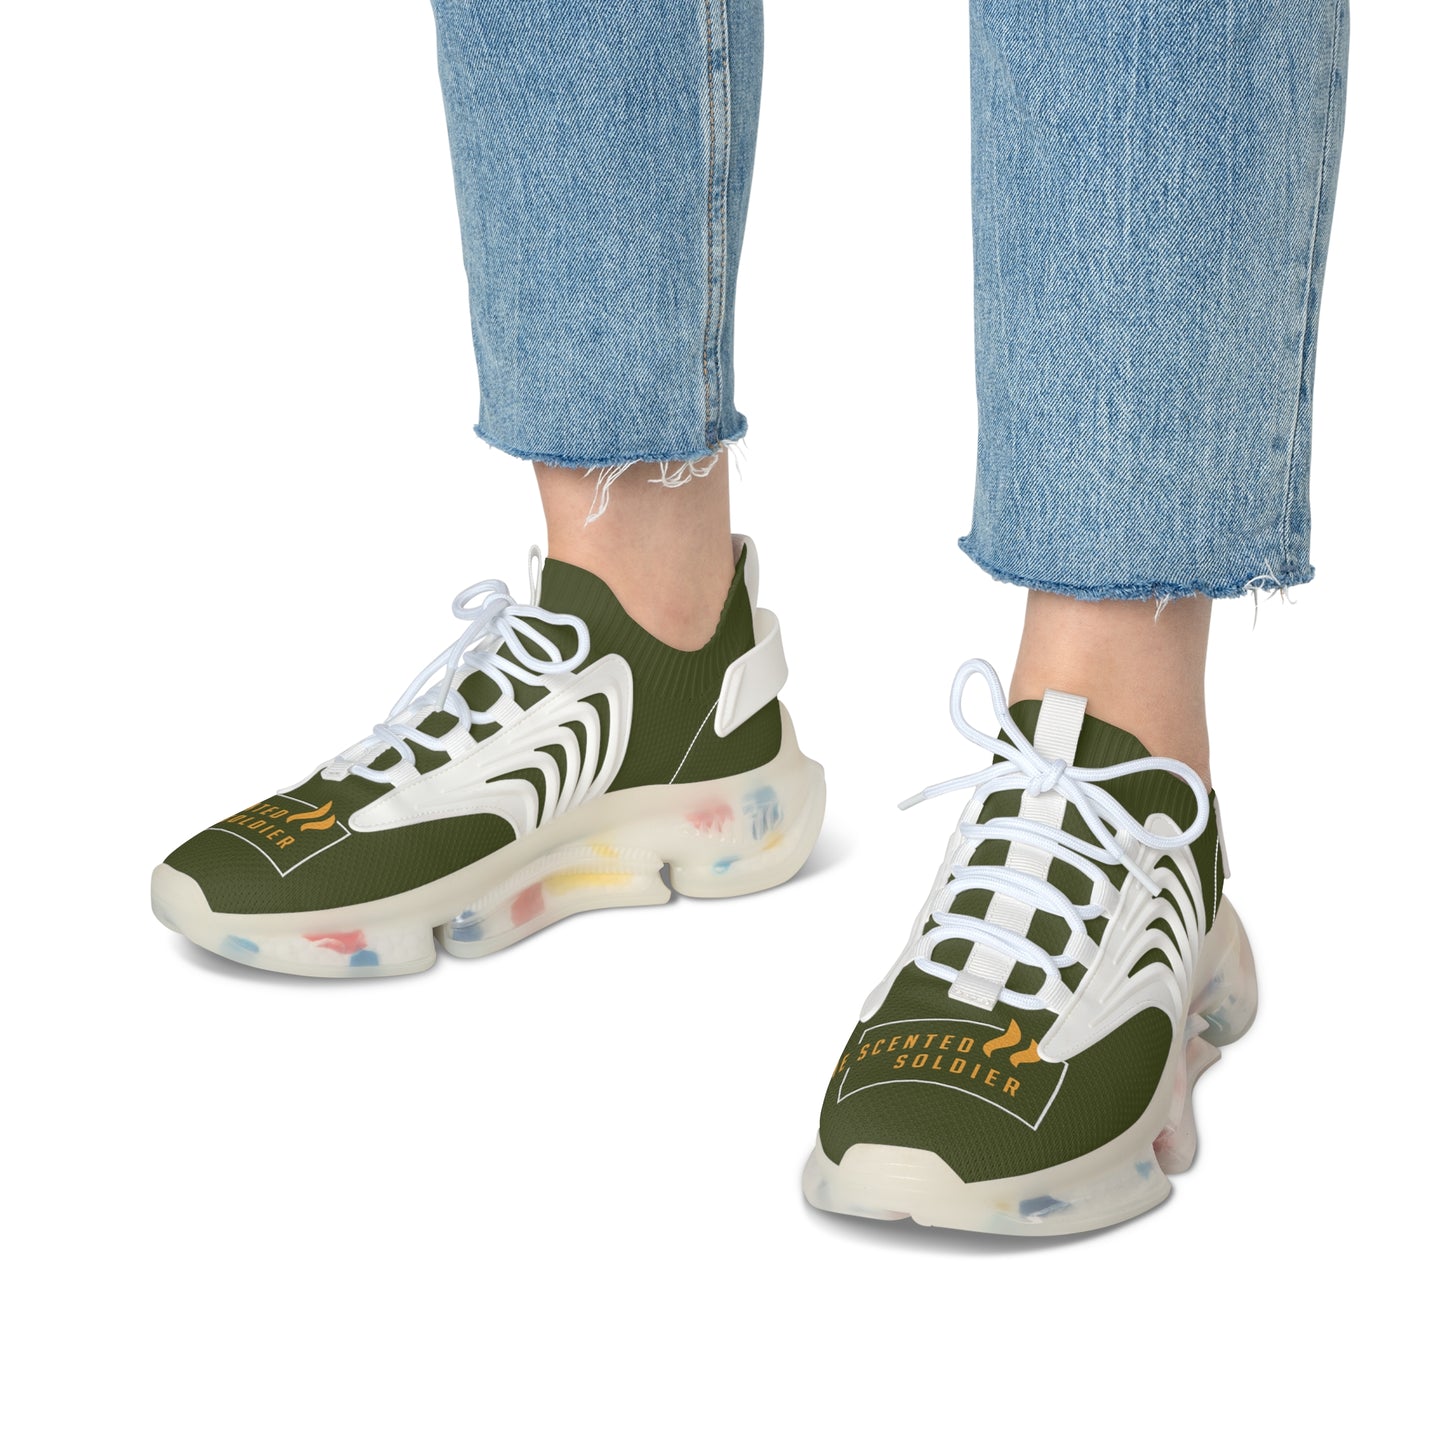 The Scented Soldier Women's Mesh Sneakers